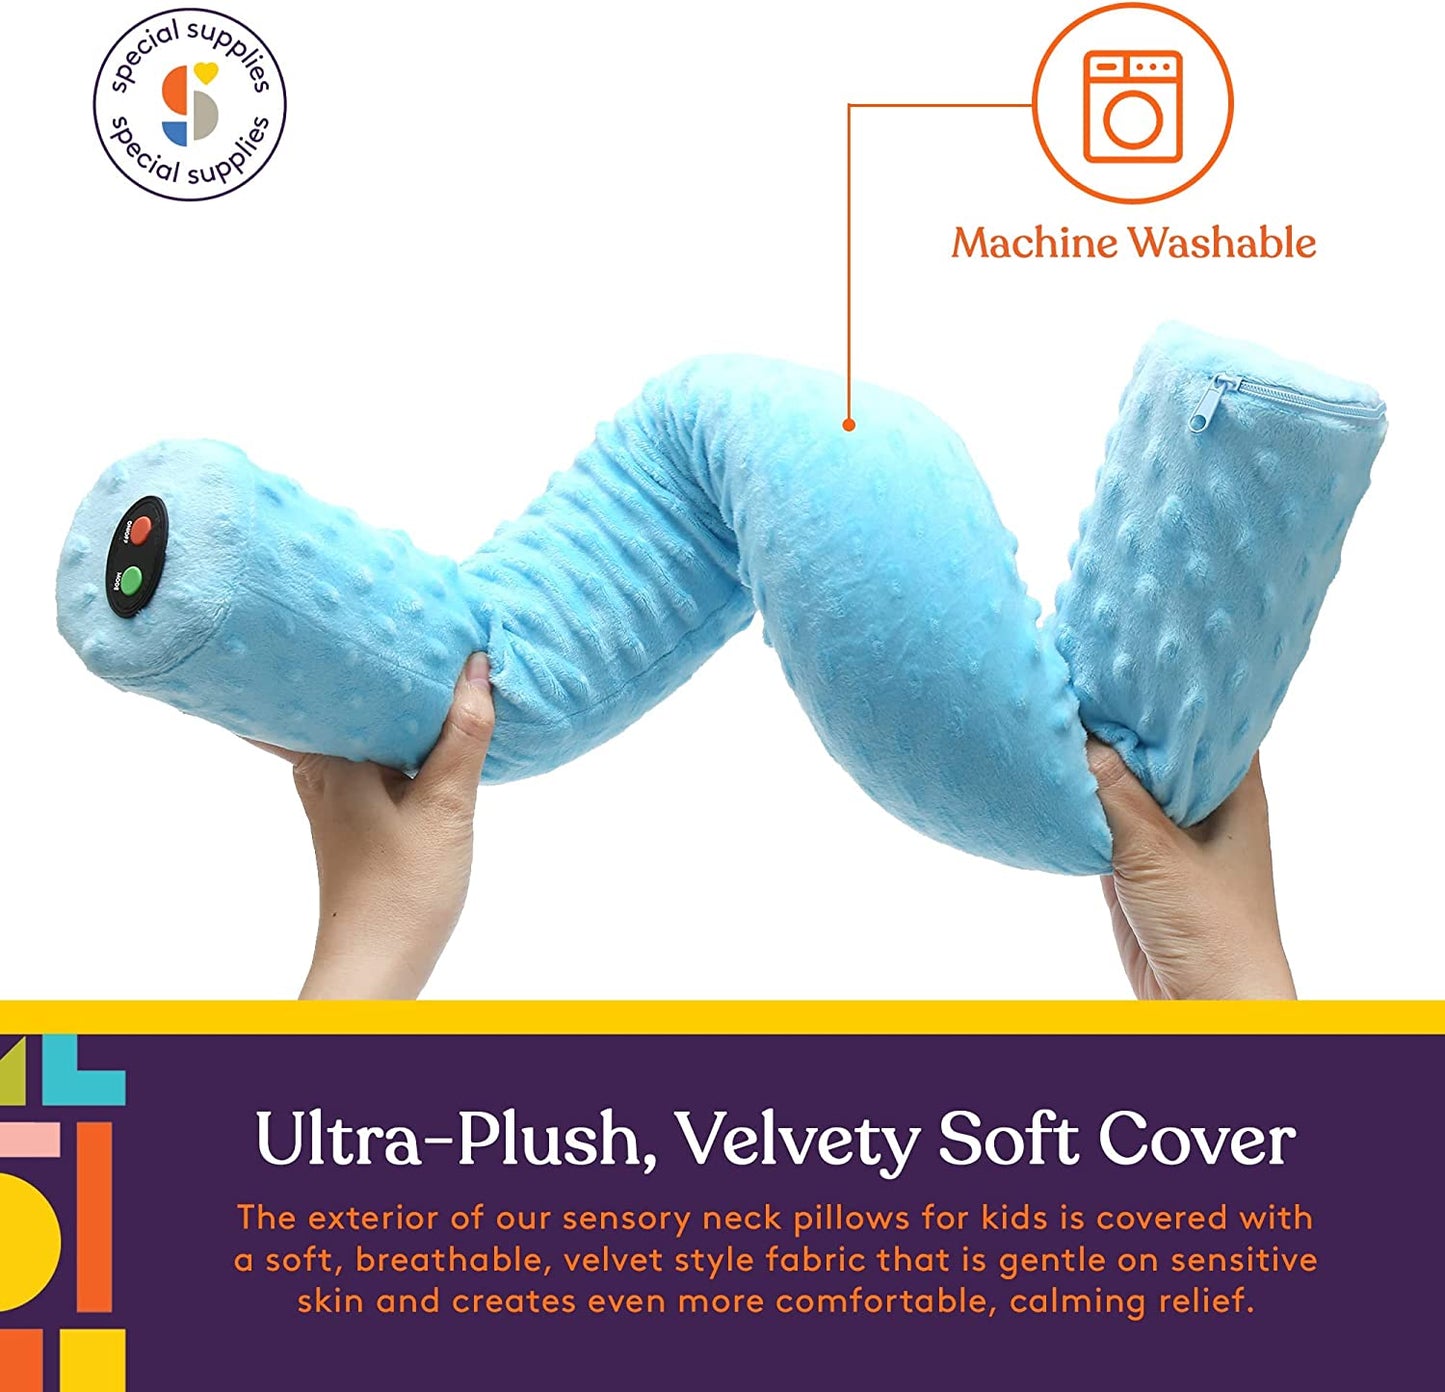 Special Supplies Sensory Vibrating Neck Pillow for Kids